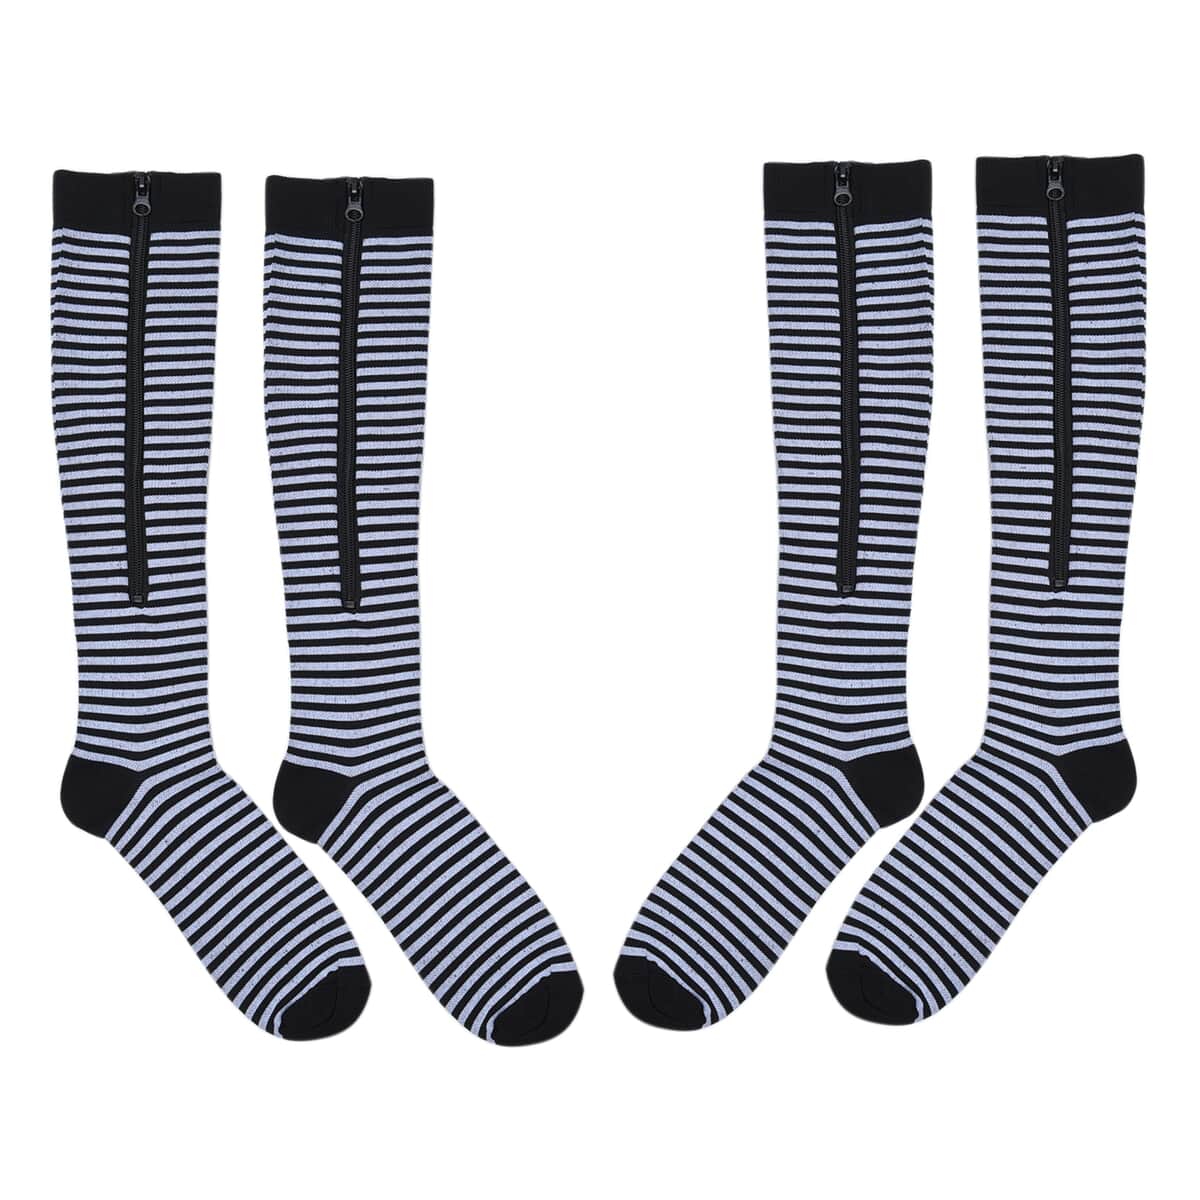 Set of 2 Black and White Spandex & Nylon 15-20mmHg Compression Socks with Zipper - XXL image number 1